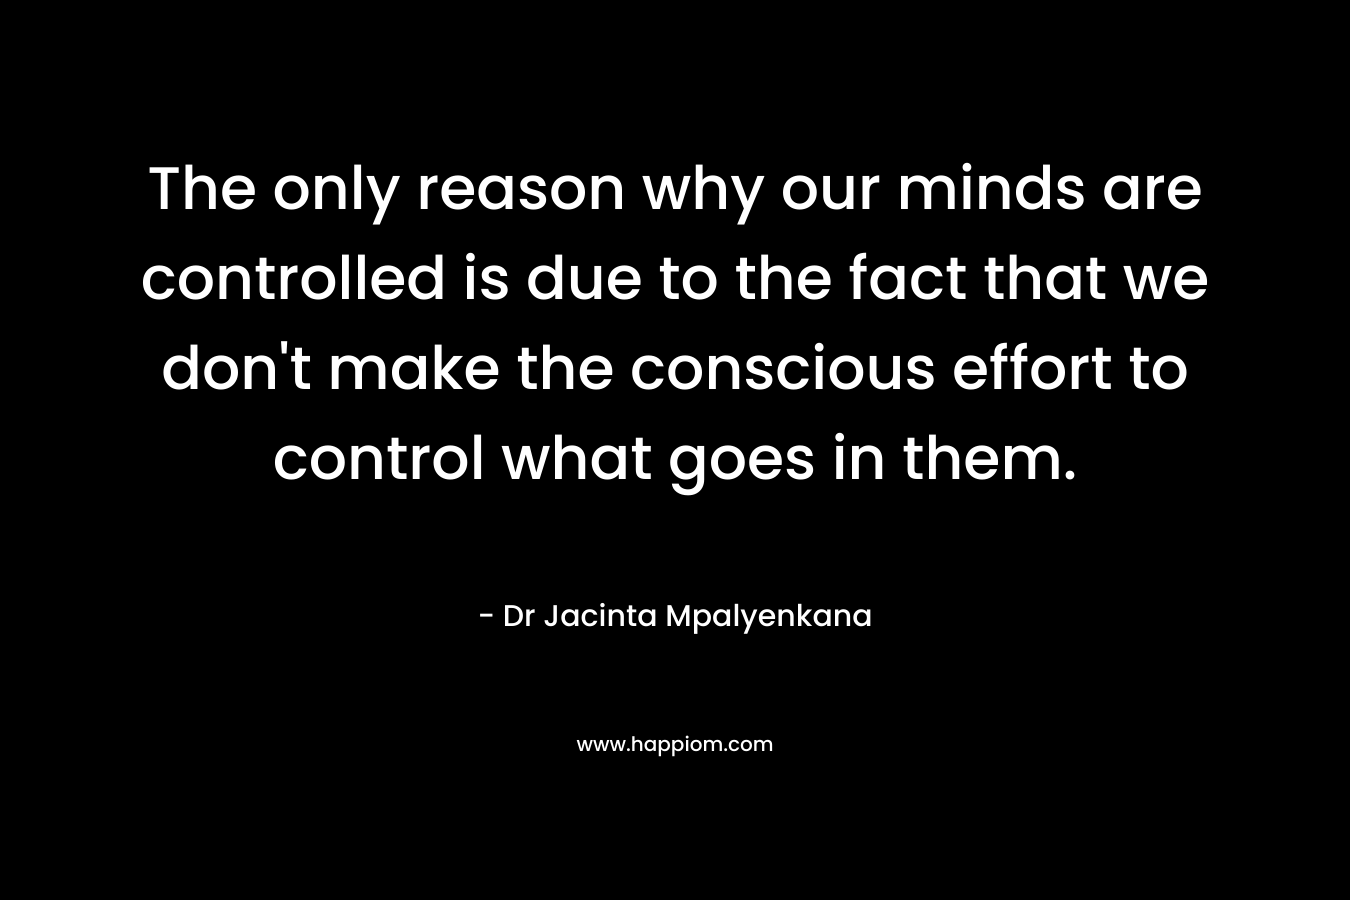 The only reason why our minds are controlled is due to the fact that we don't make the conscious effort to control what goes in them.